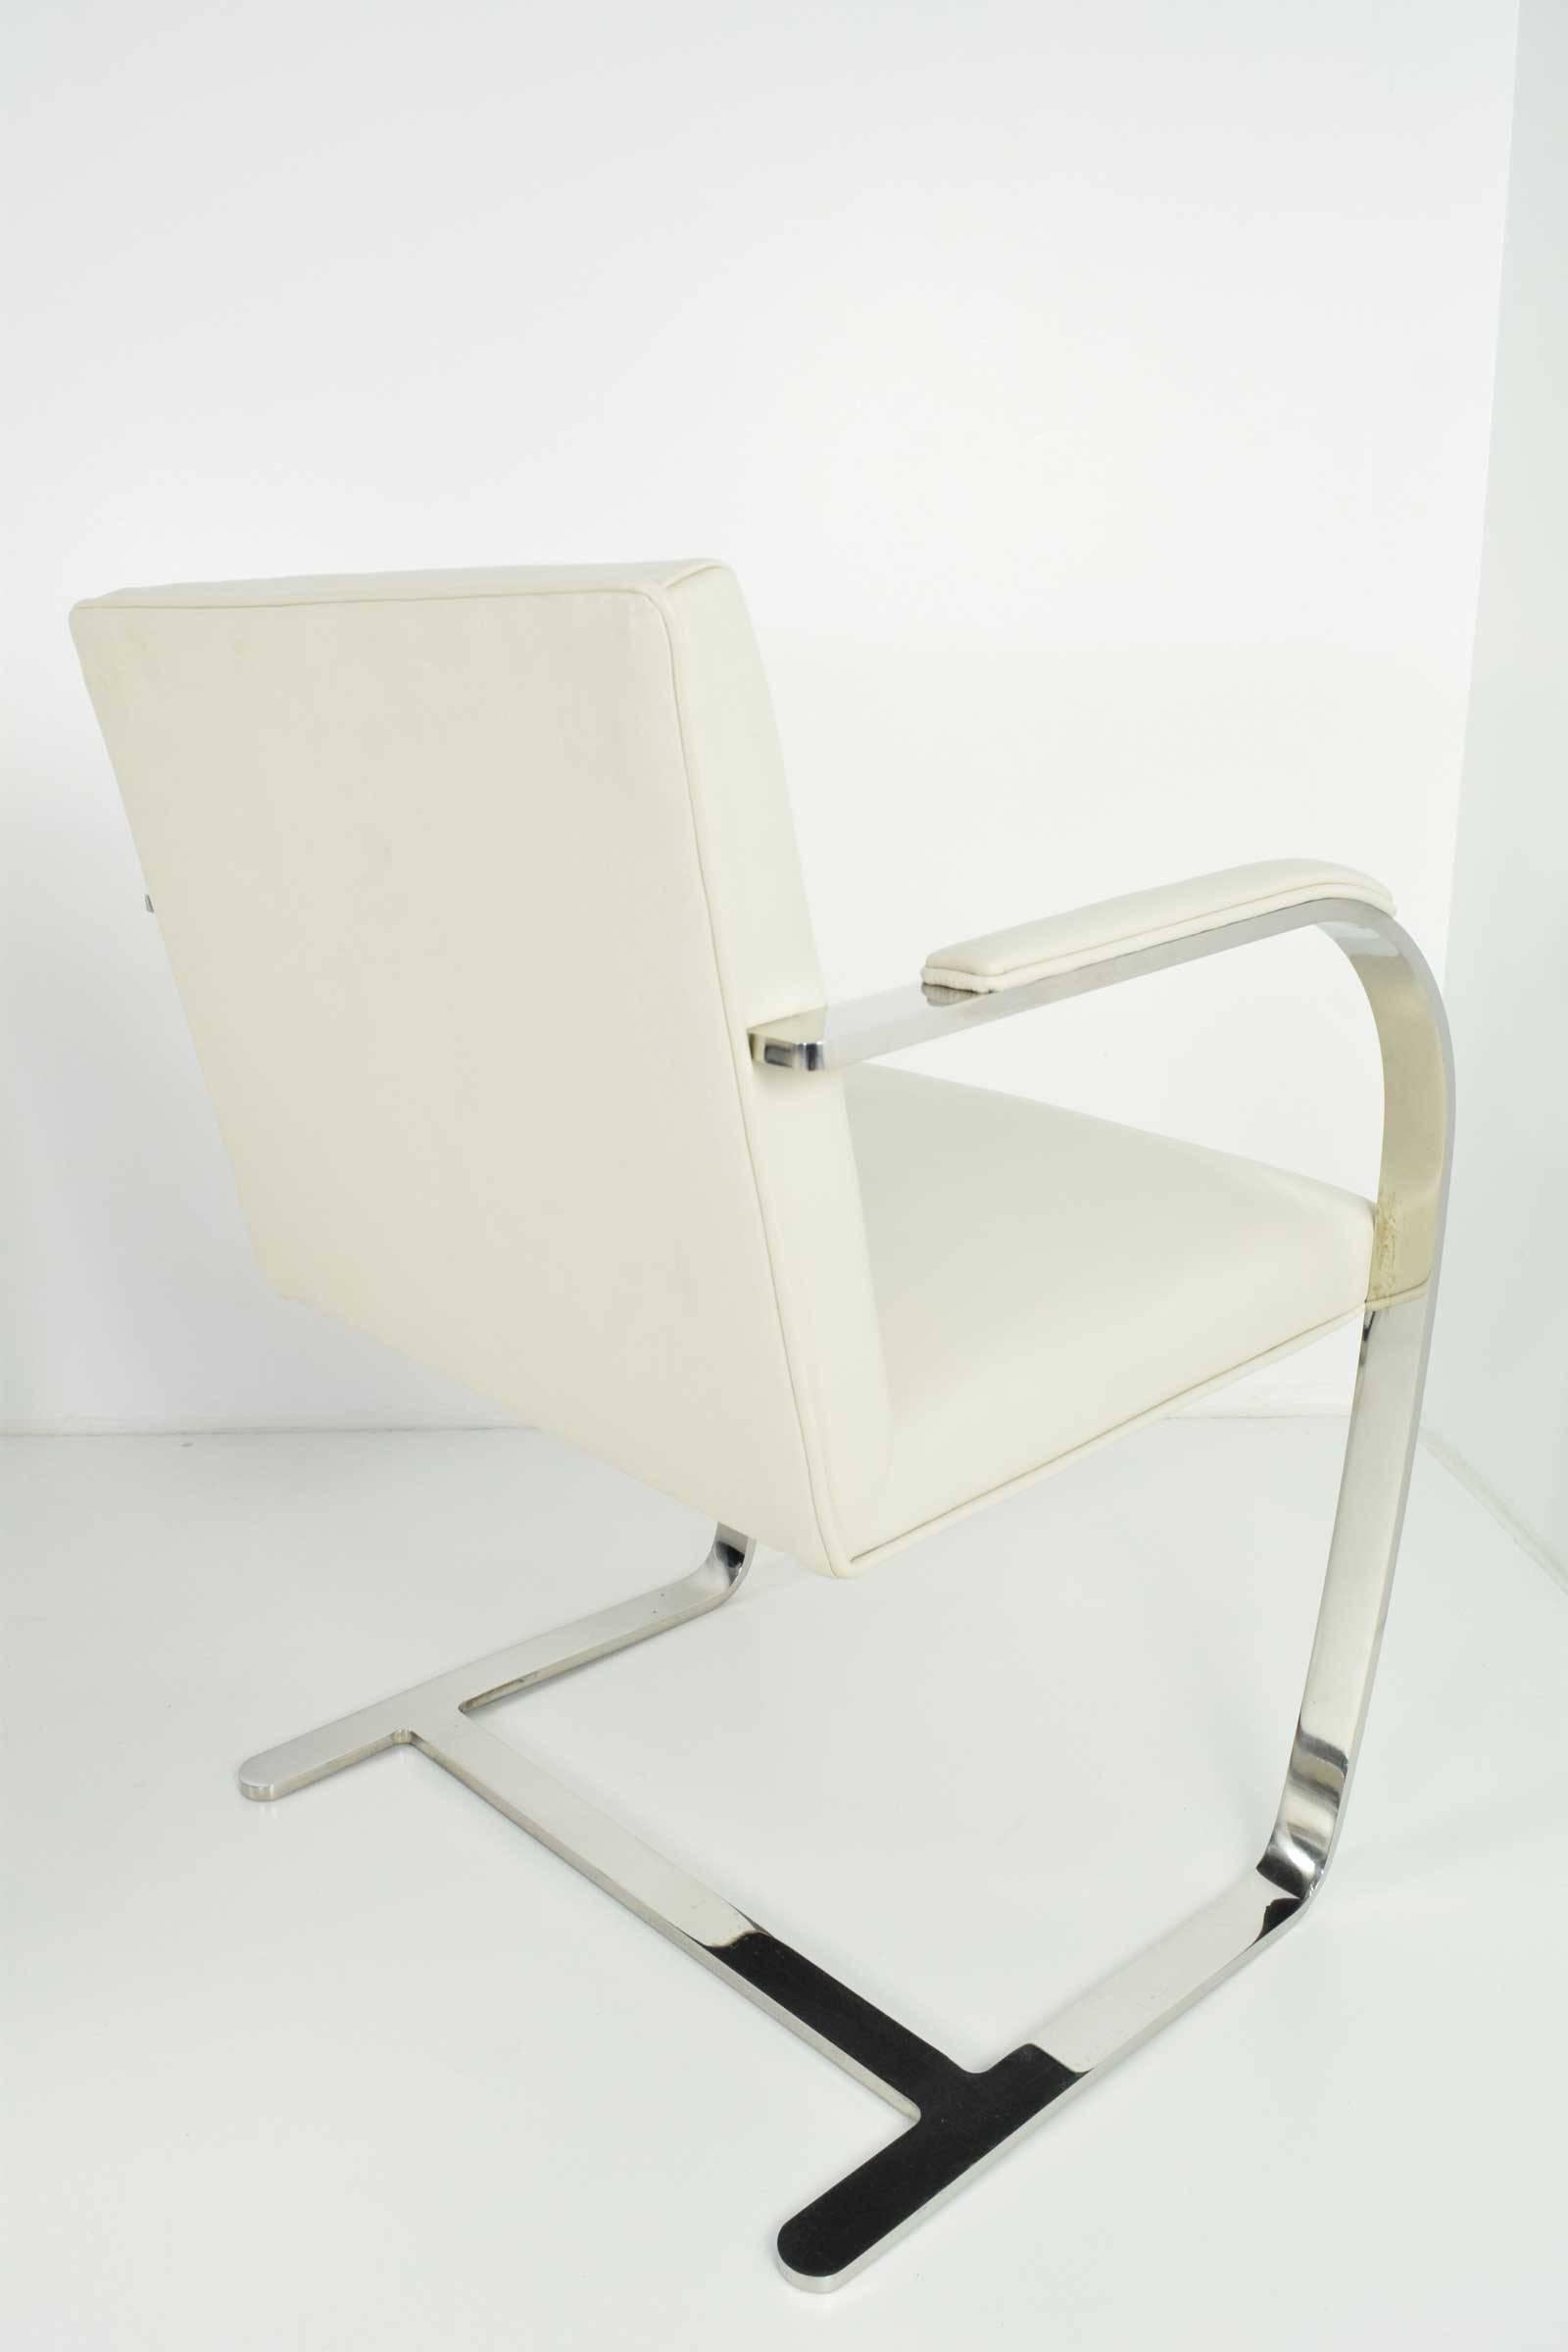 This is a set of four flat bar Brno chairs by Mies van der Rohe for Knoll. Chairs have practically brand new leather upholstery in a light grey and include arm pads. Provenance: An important estate in Connecticut designed and decorated by Warren